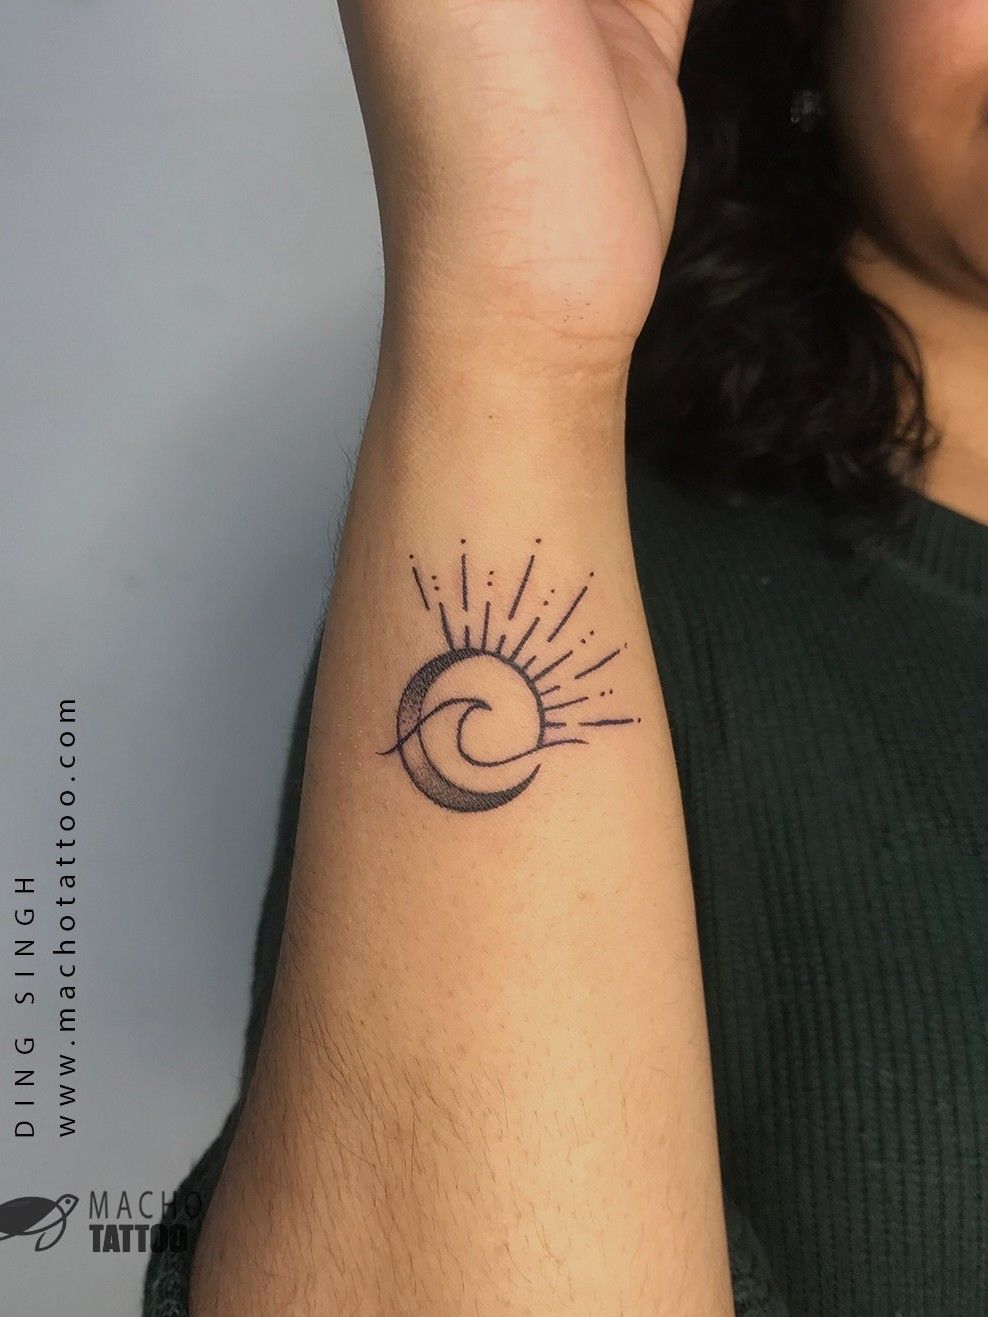 Buy Small Moon Temporary Tattoo / Crescent Moon Tattoo Online in India -  Etsy